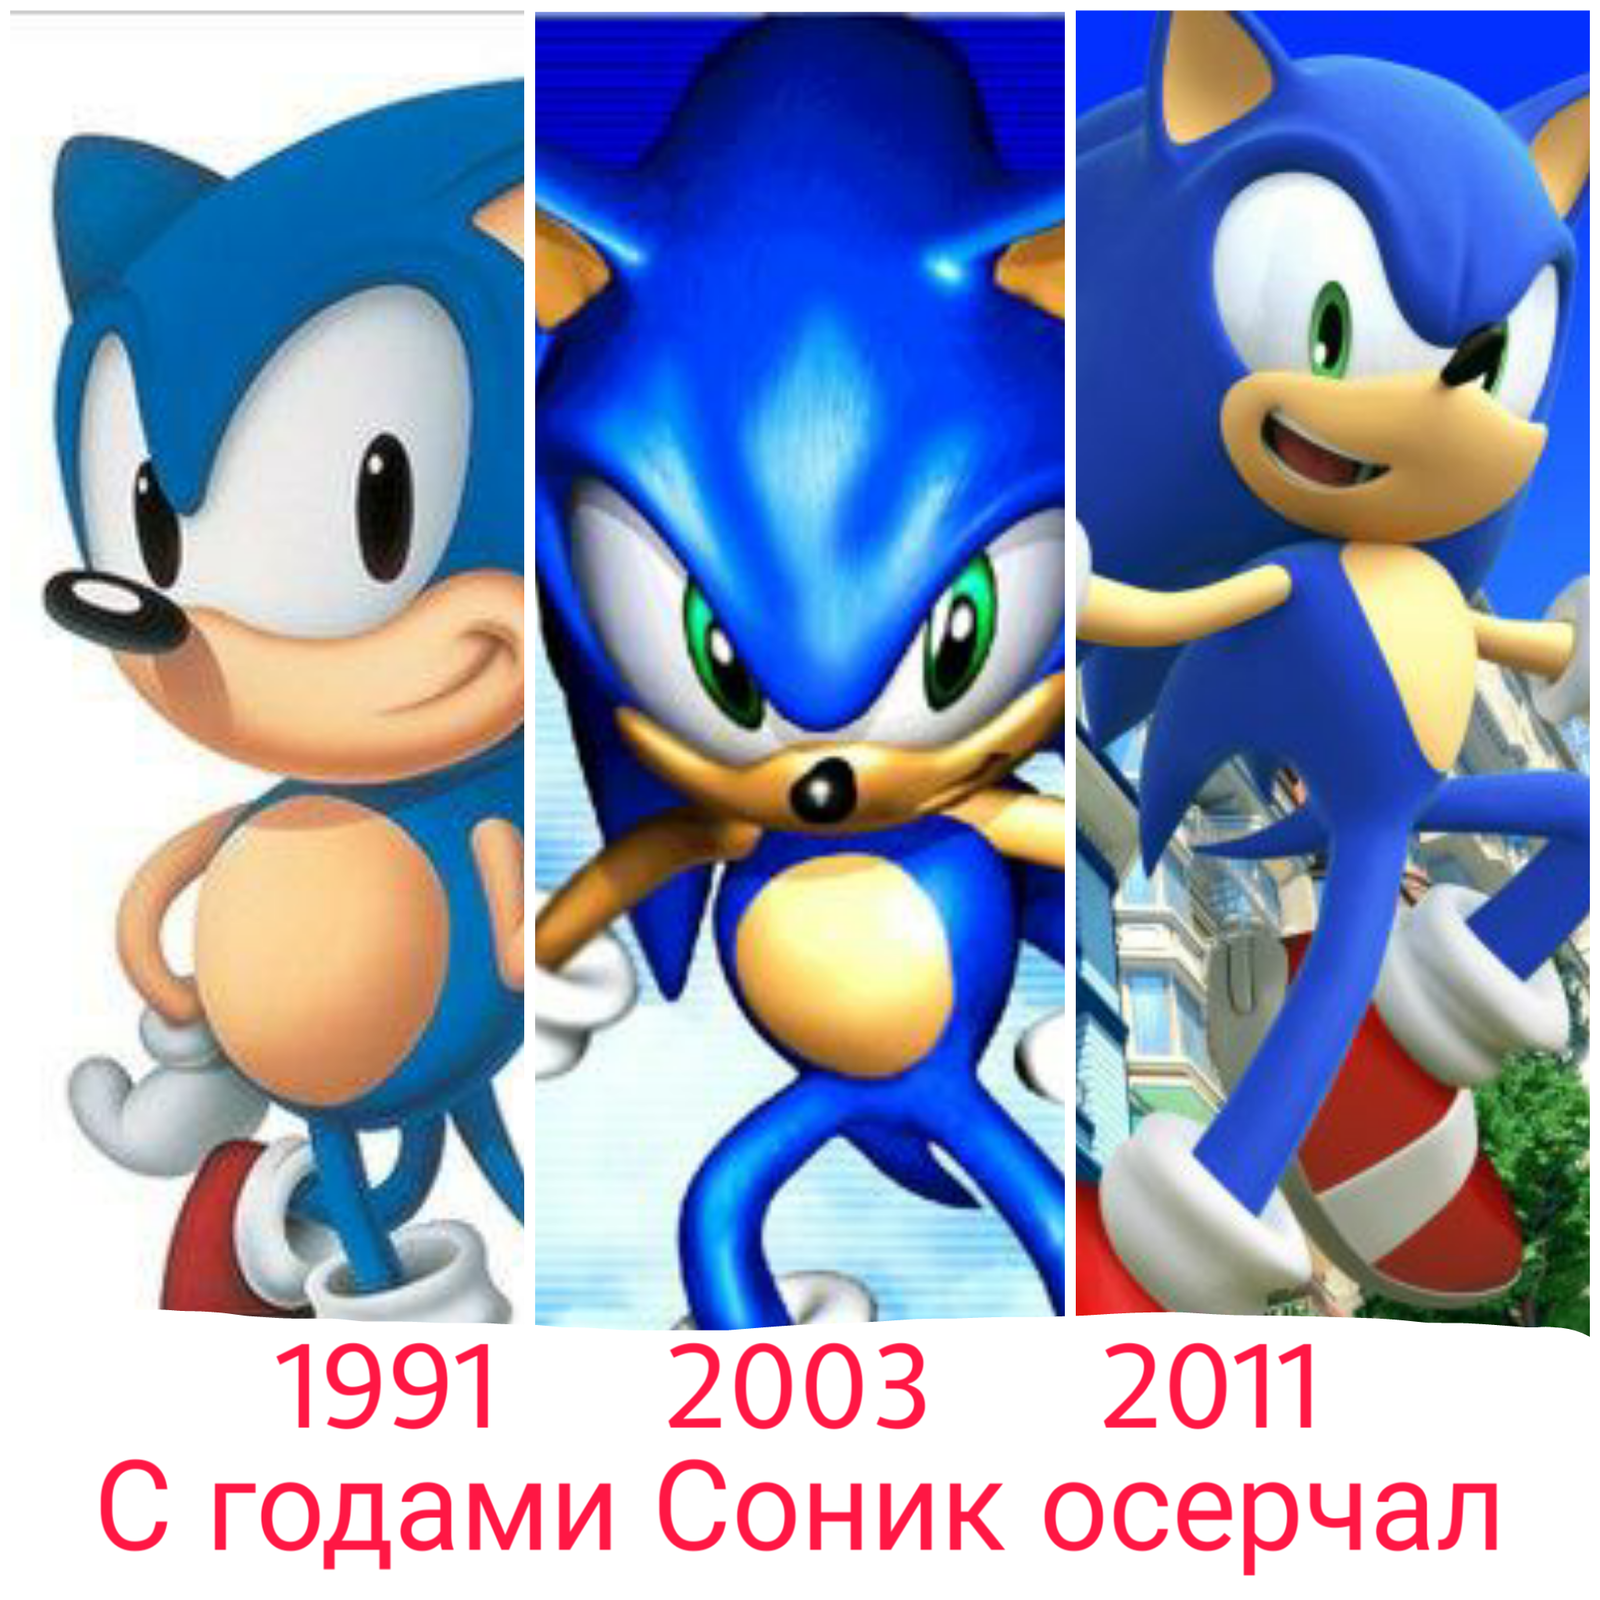 Sonic grows up - Sonic the hedgehog, Sonic the Hedgehog